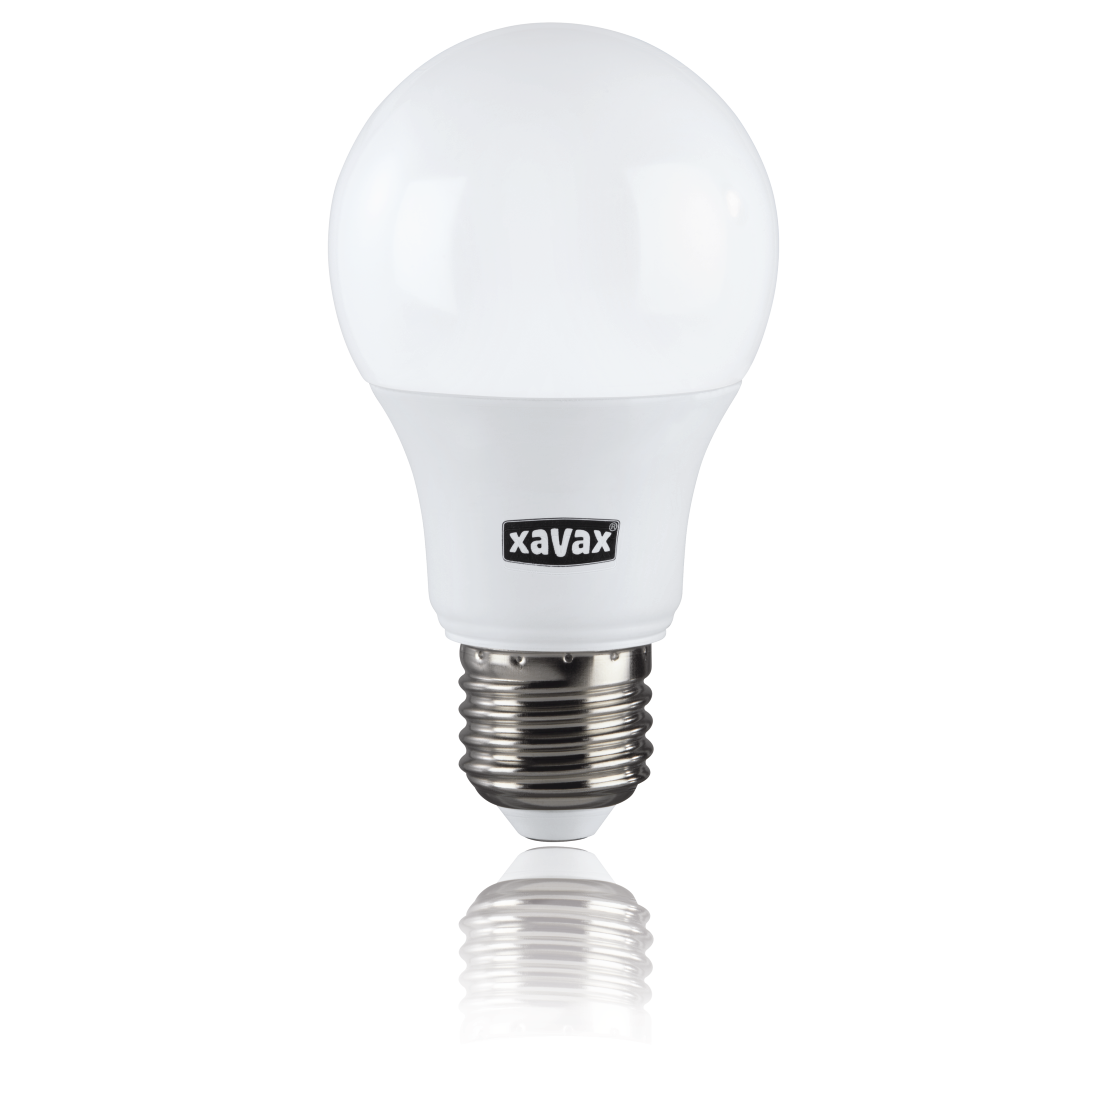 abx2 High-Res Image 2 - Xavax, LED Bulb, E27, 806 lm Replaces 60W, Incandescent Bulb, warm white